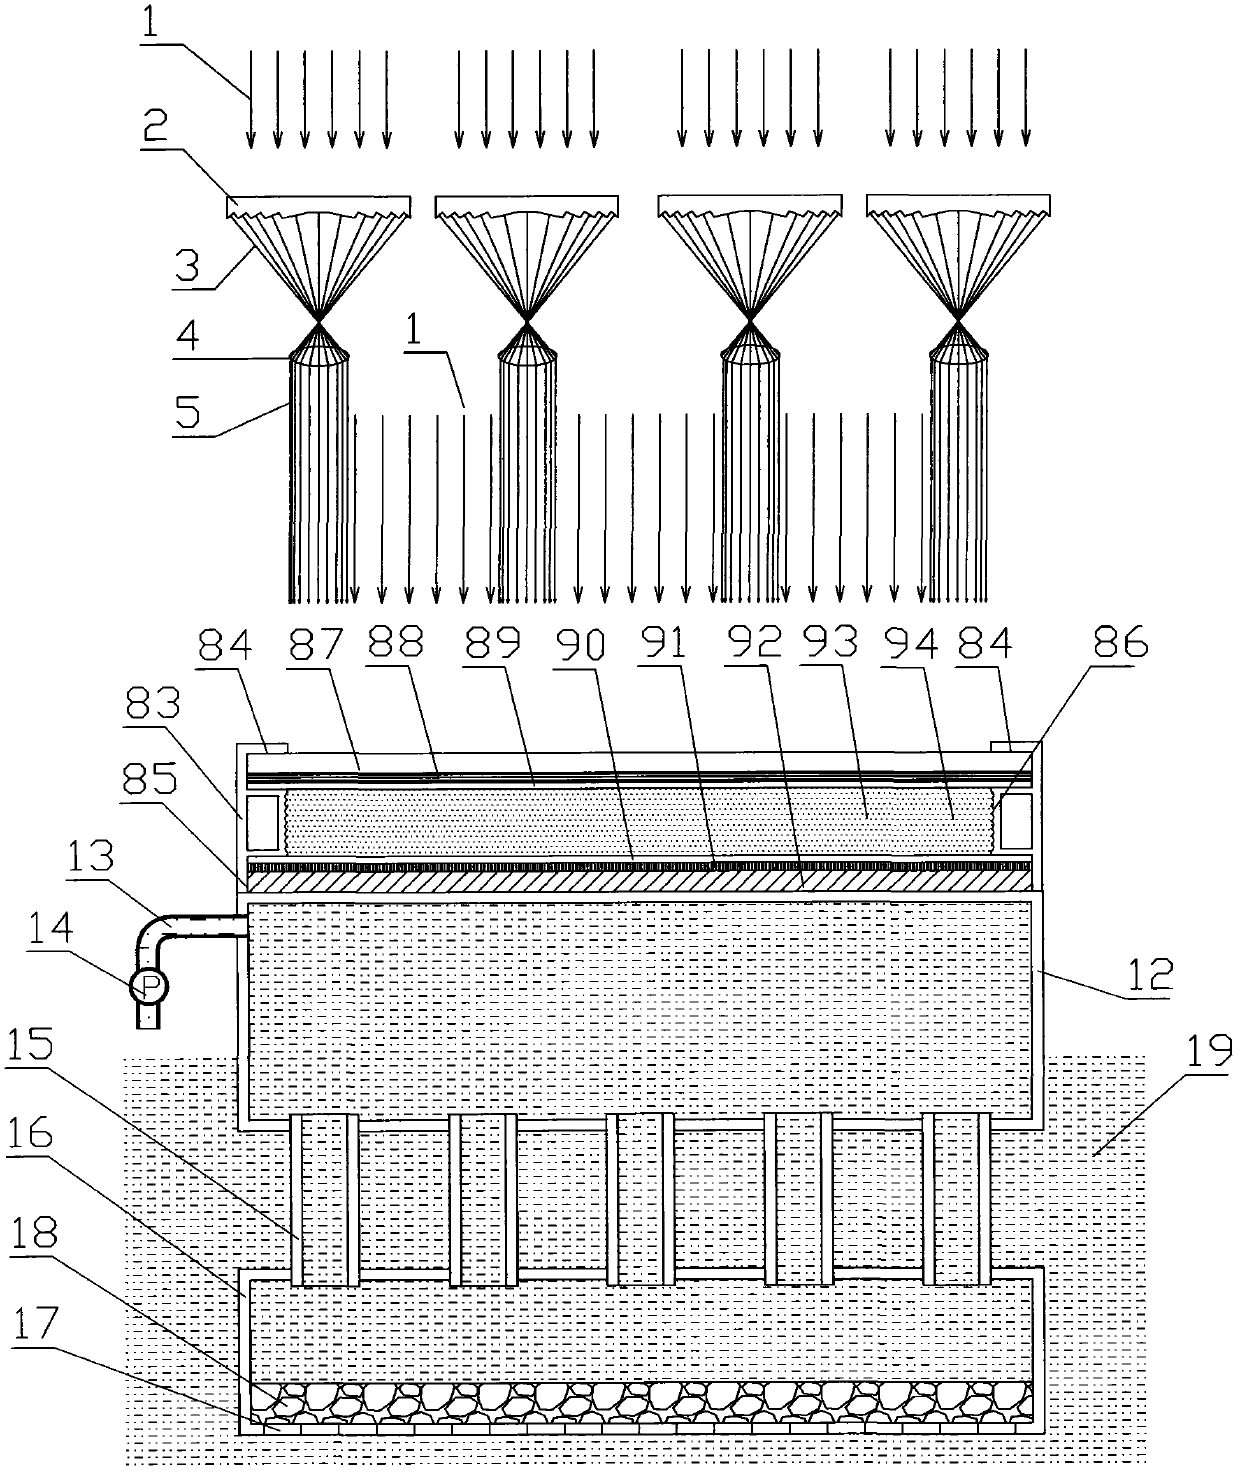 Solar thermoelectric power generation system